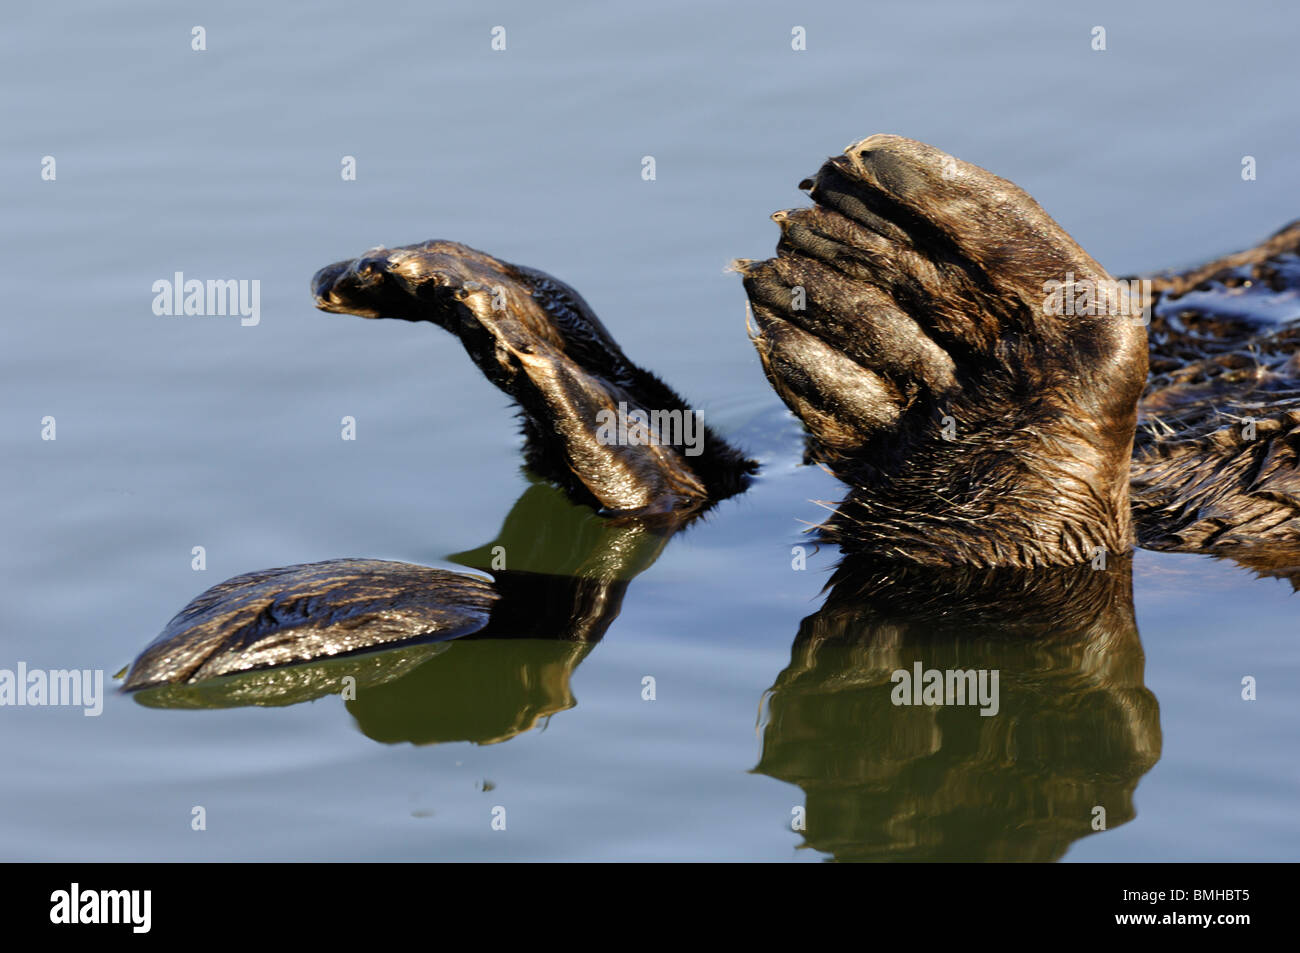 Stock photo closeup image of a sea otter's flippers. Stock Photo